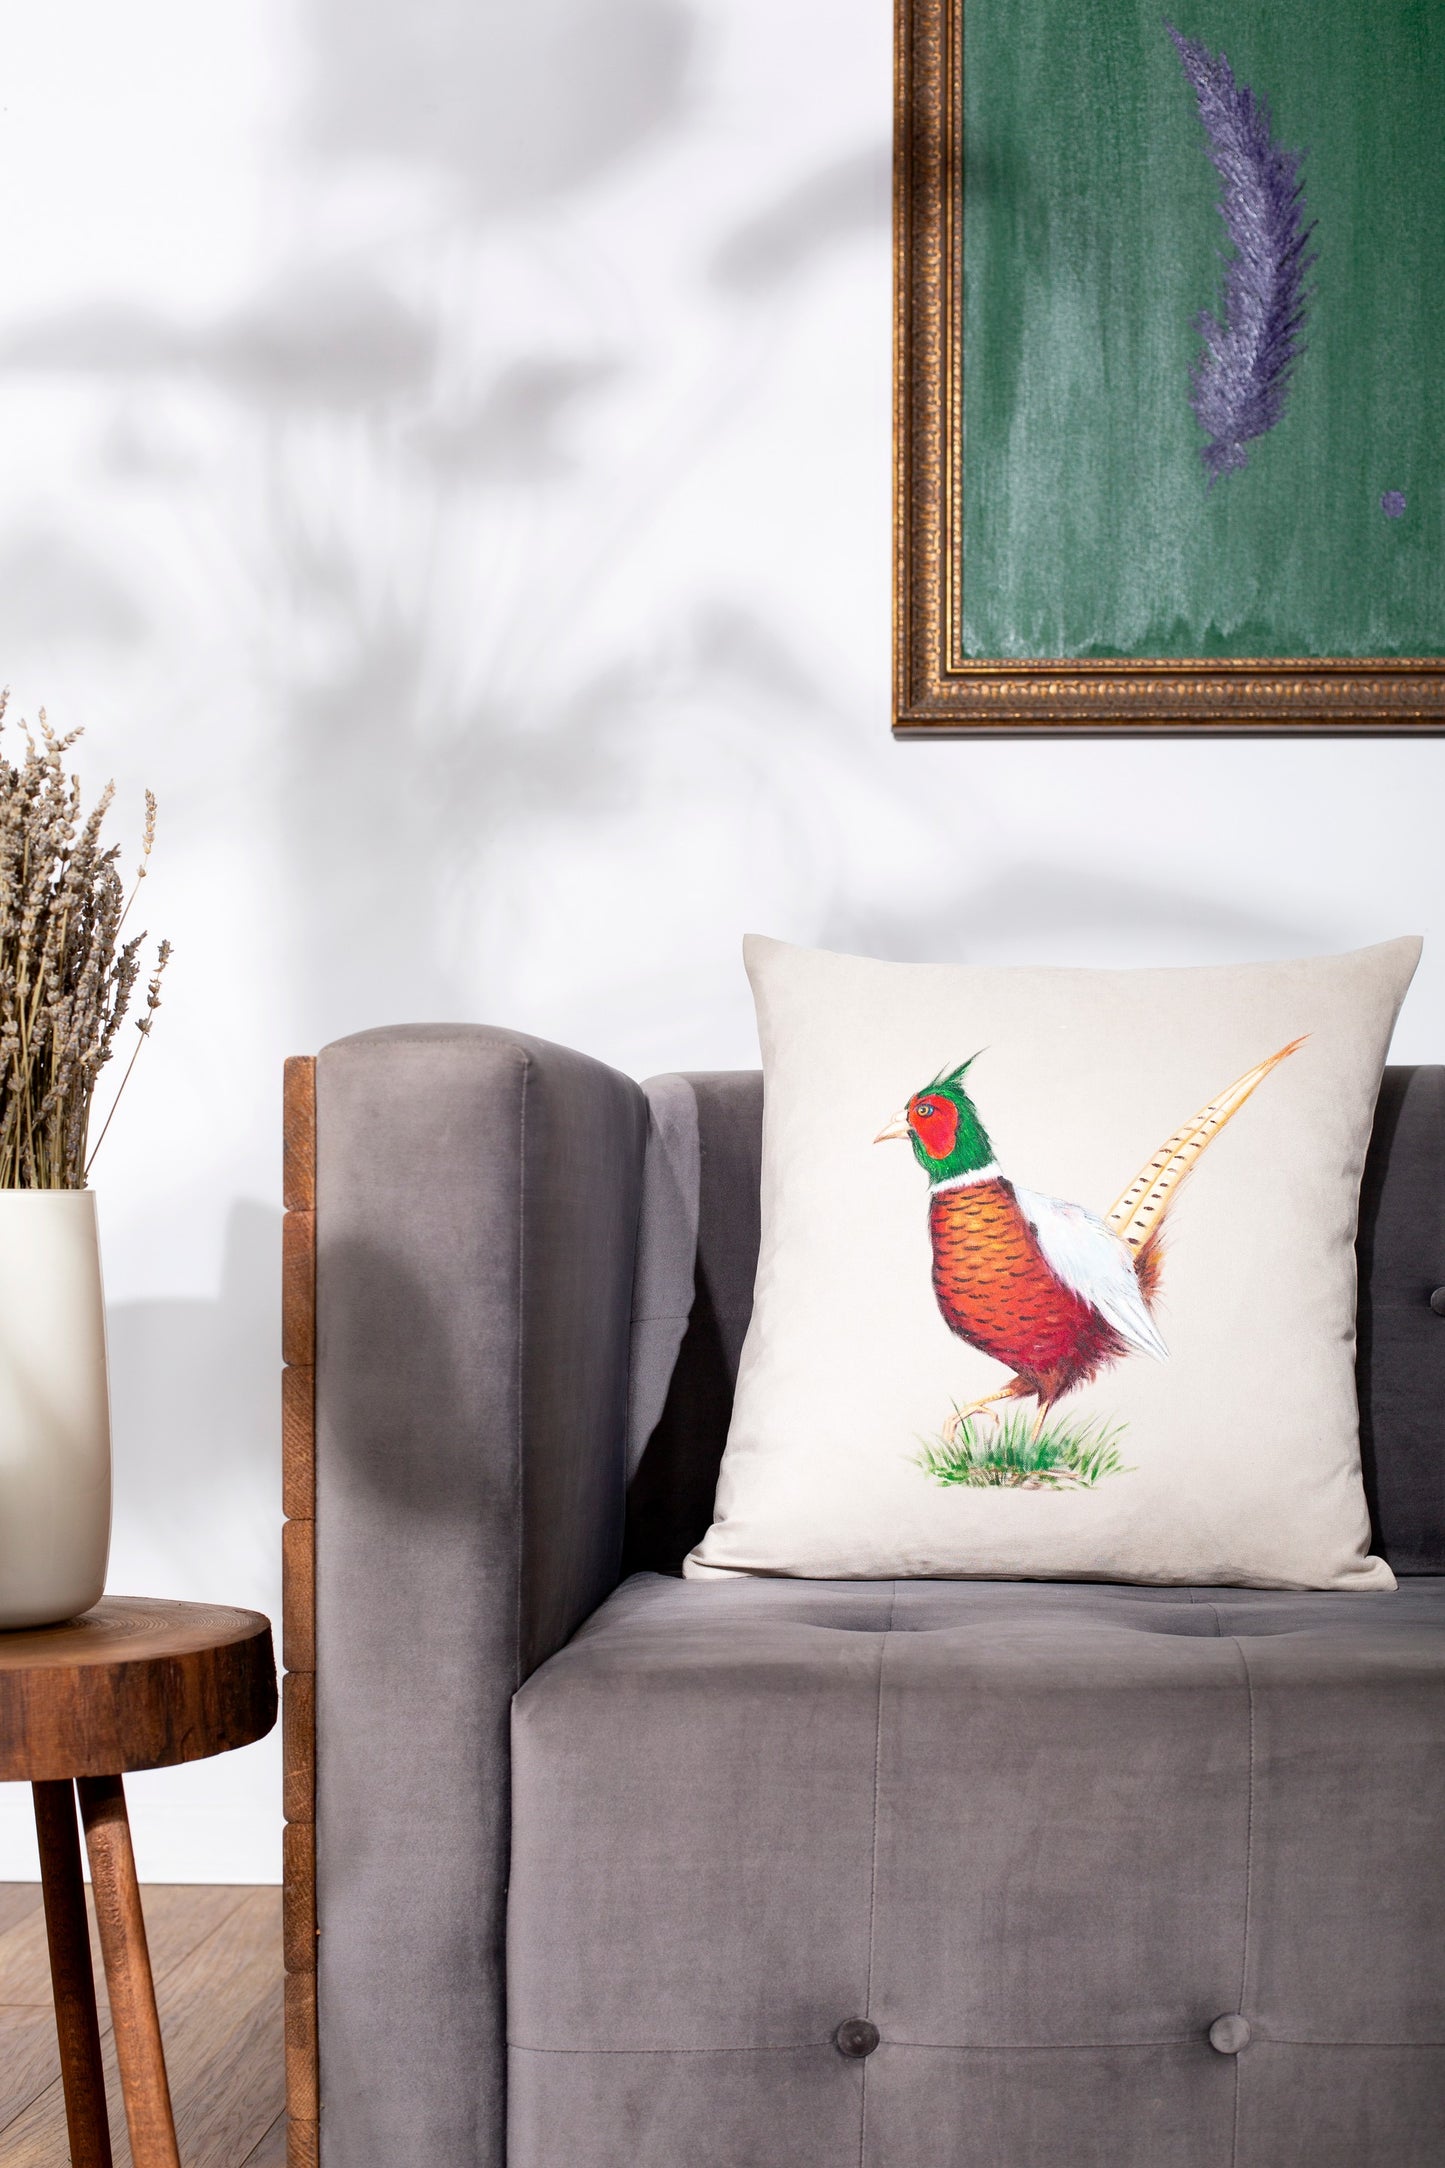 Load image into Gallery viewer, Hand Painting Bird Figure Pillow Cover Pheasant
